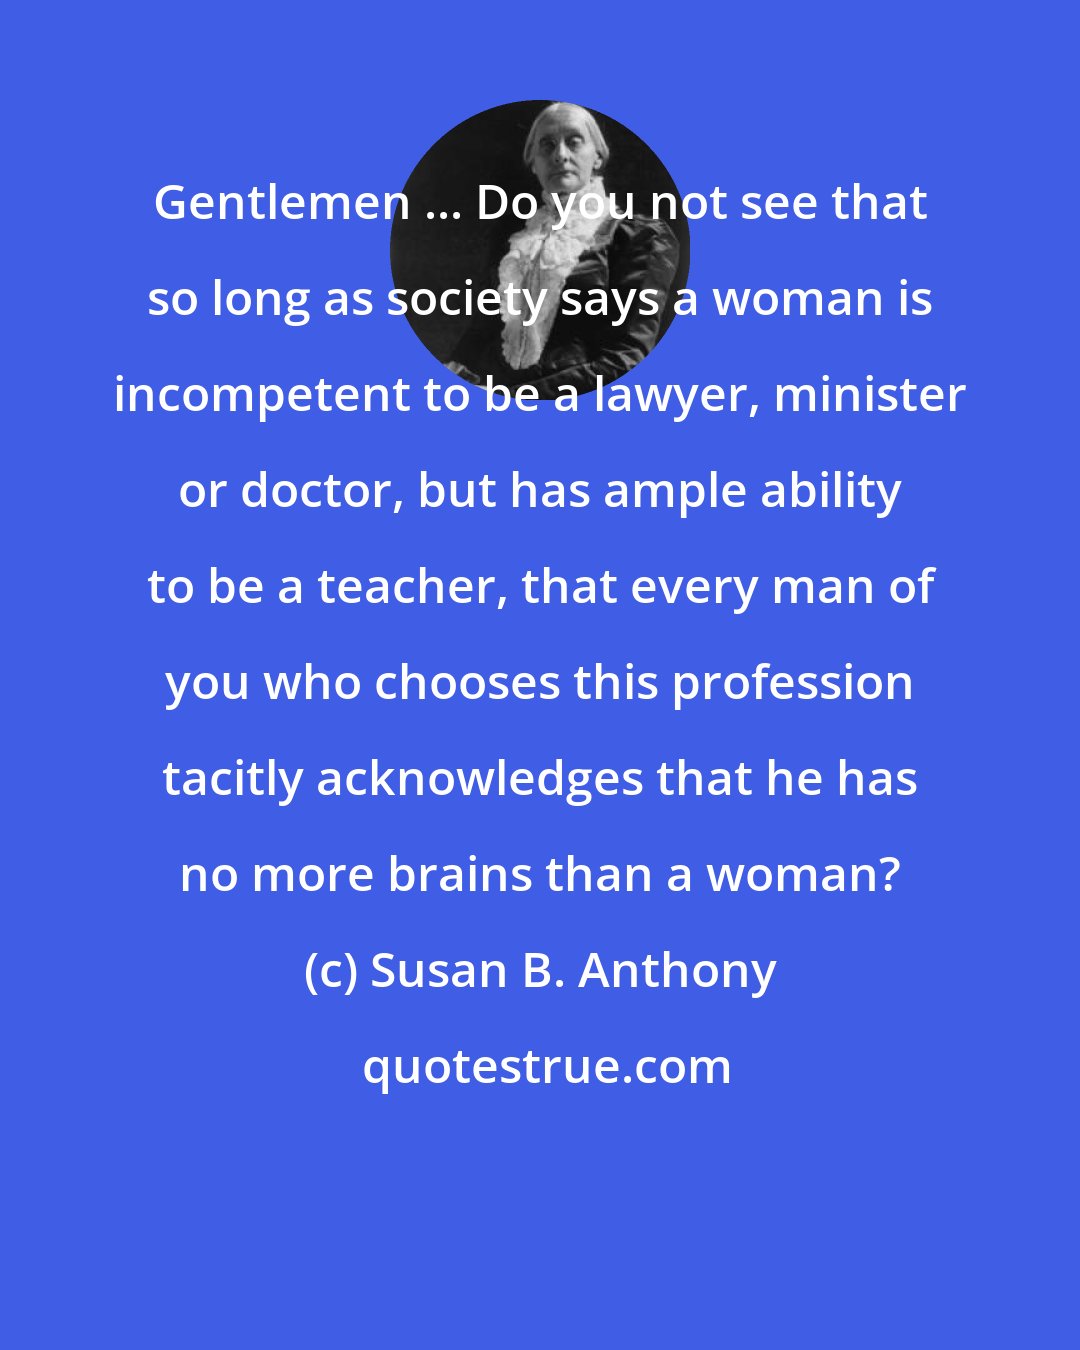 Susan B. Anthony: Gentlemen ... Do you not see that so long as society says a woman is incompetent to be a lawyer, minister or doctor, but has ample ability to be a teacher, that every man of you who chooses this profession tacitly acknowledges that he has no more brains than a woman?